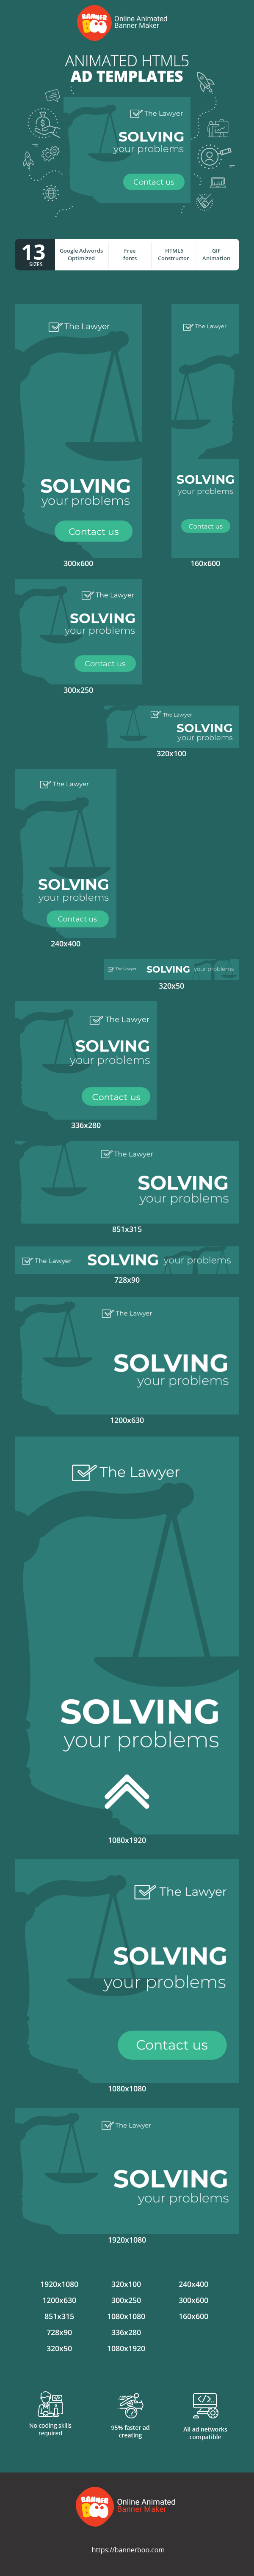 Banner ad template — Solving Your Problems  — Lawyer